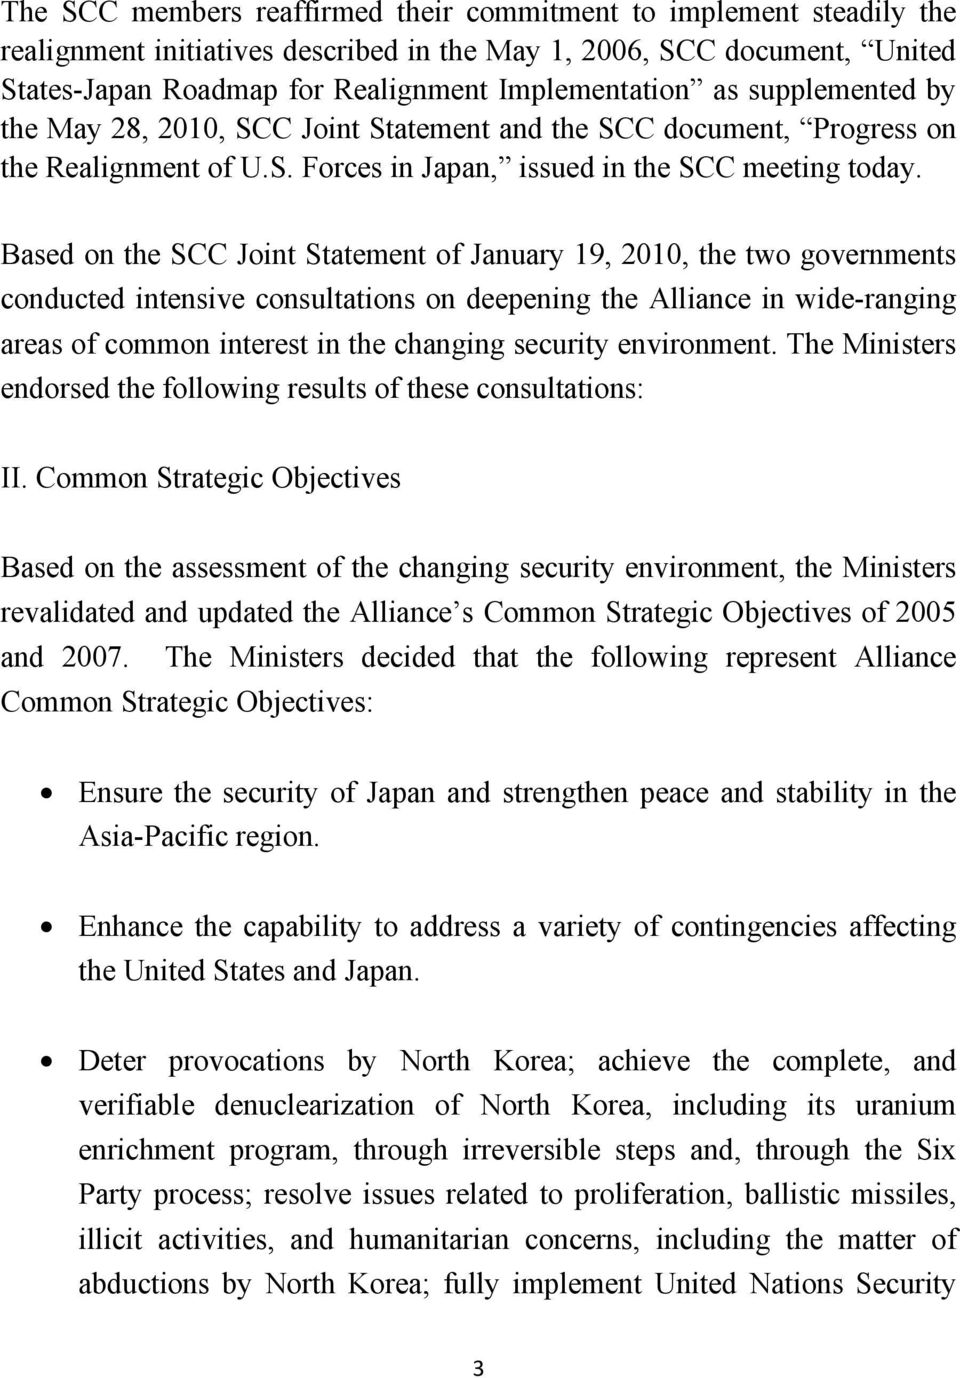 Based on the SCC Joint Statement of January 19, 2010, the two governments conducted intensive consultations on deepening the Alliance in wide-ranging areas of common interest in the changing security